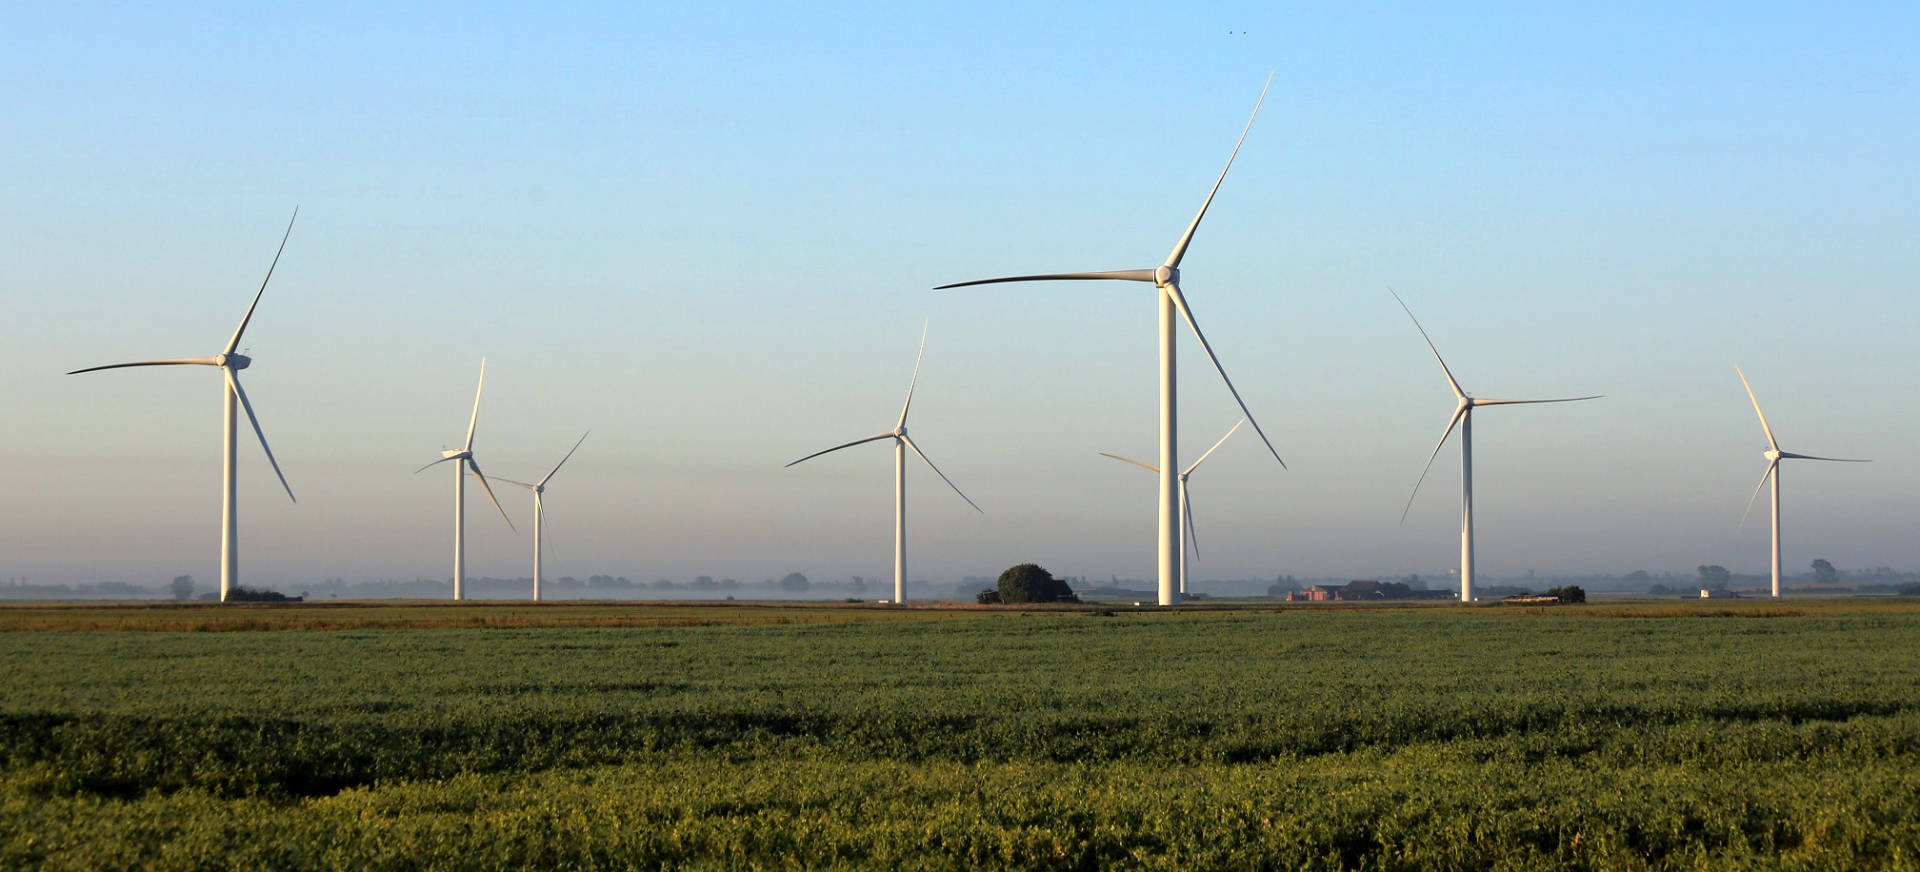 The international marketplace of the wind industry, turbine